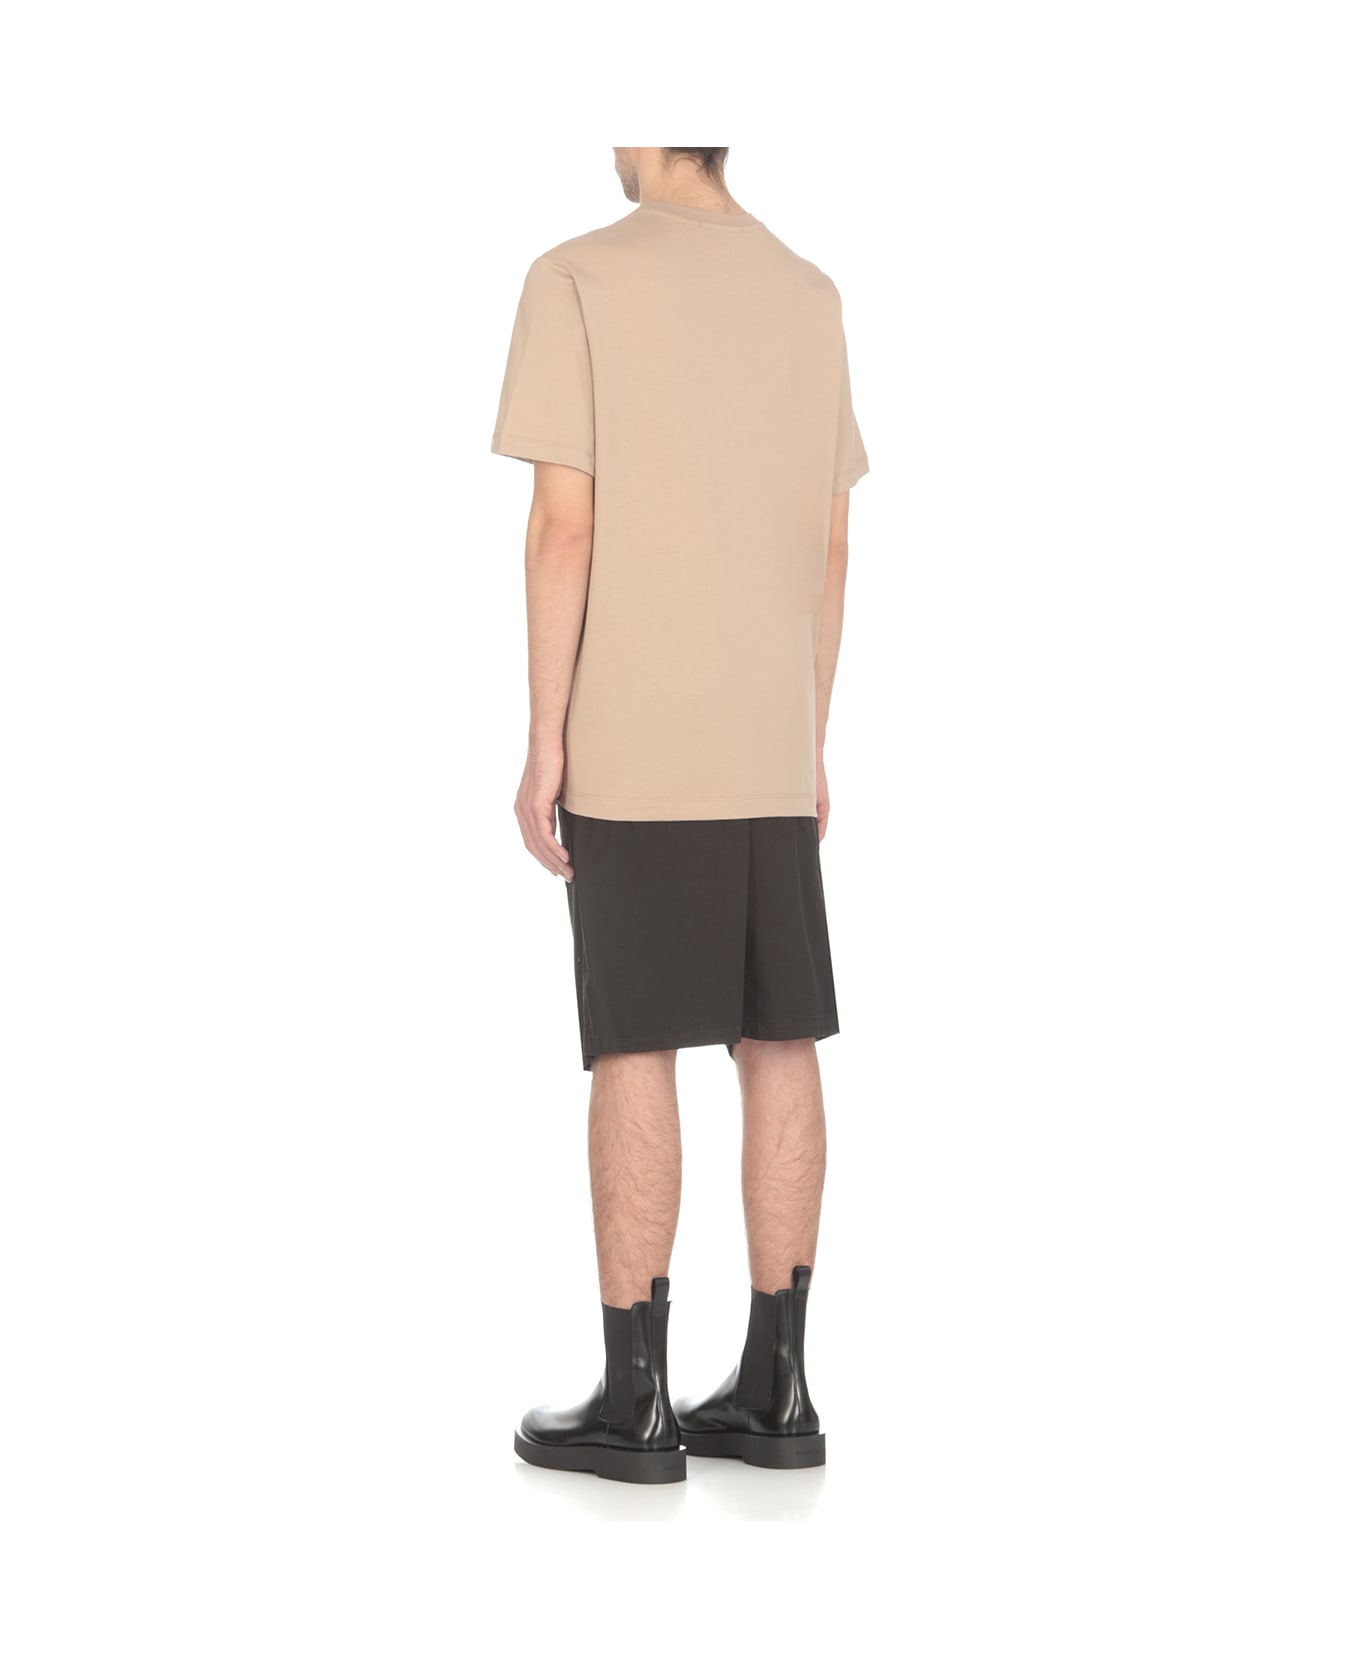 MSGM T-shirt With Logo - Beige